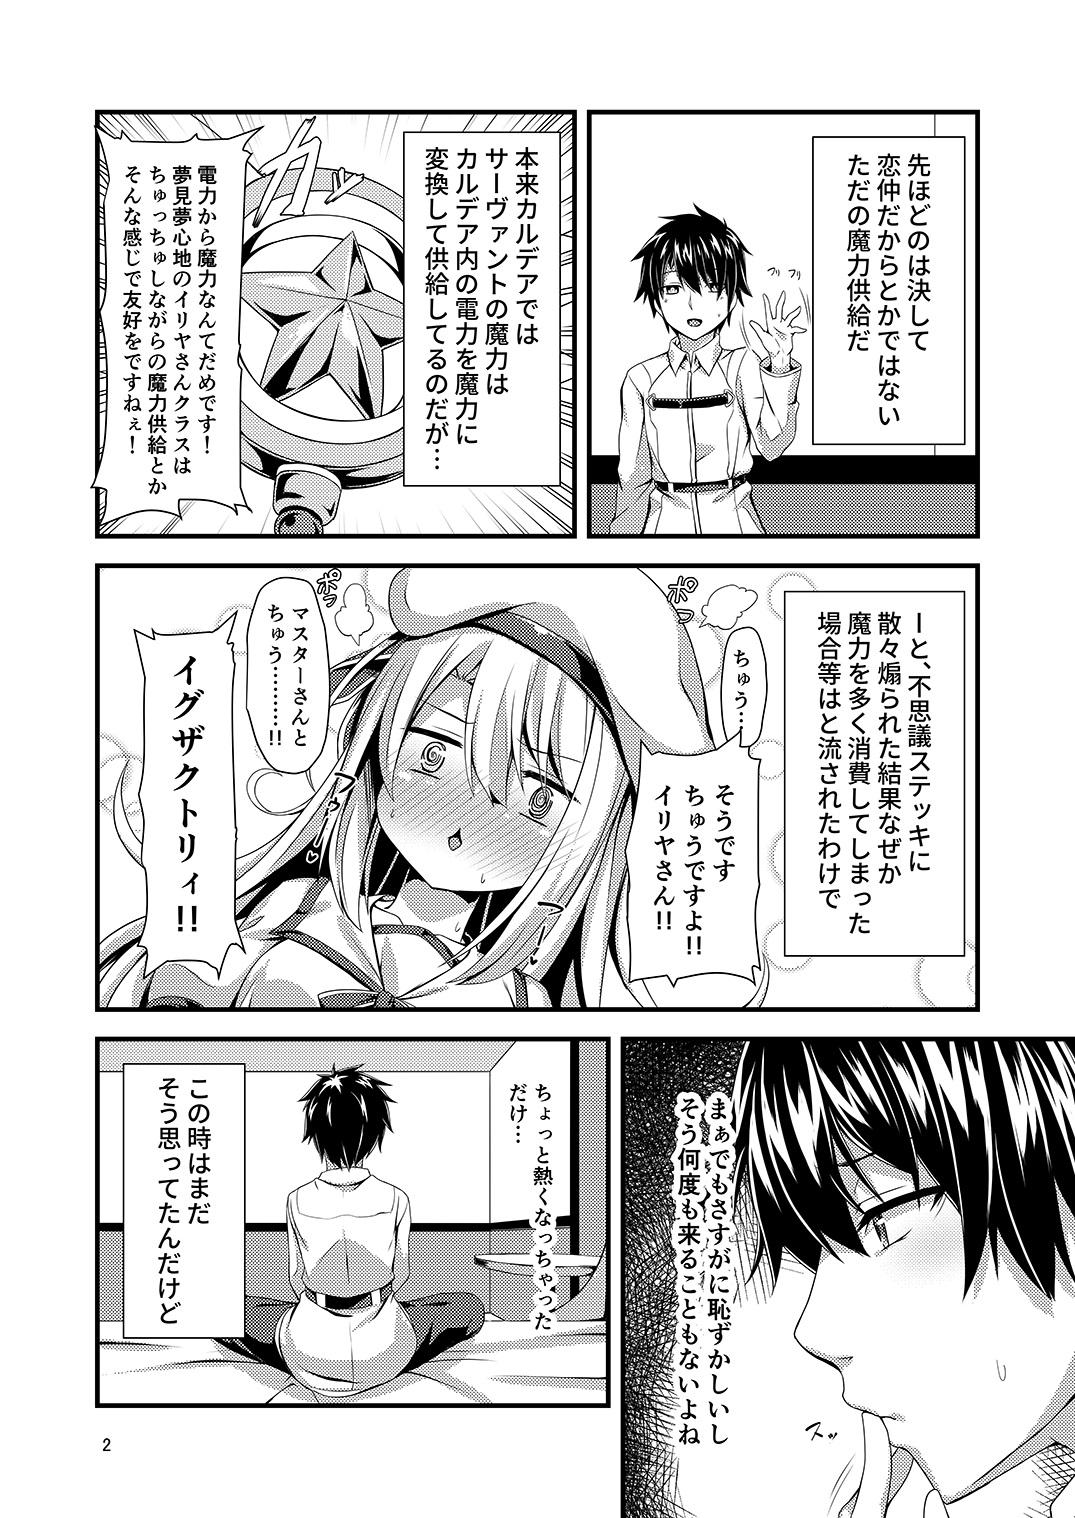 Sexcam Ama Love Illya - Fate grand order Fate kaleid liner prisma illya Amateur - Page 4